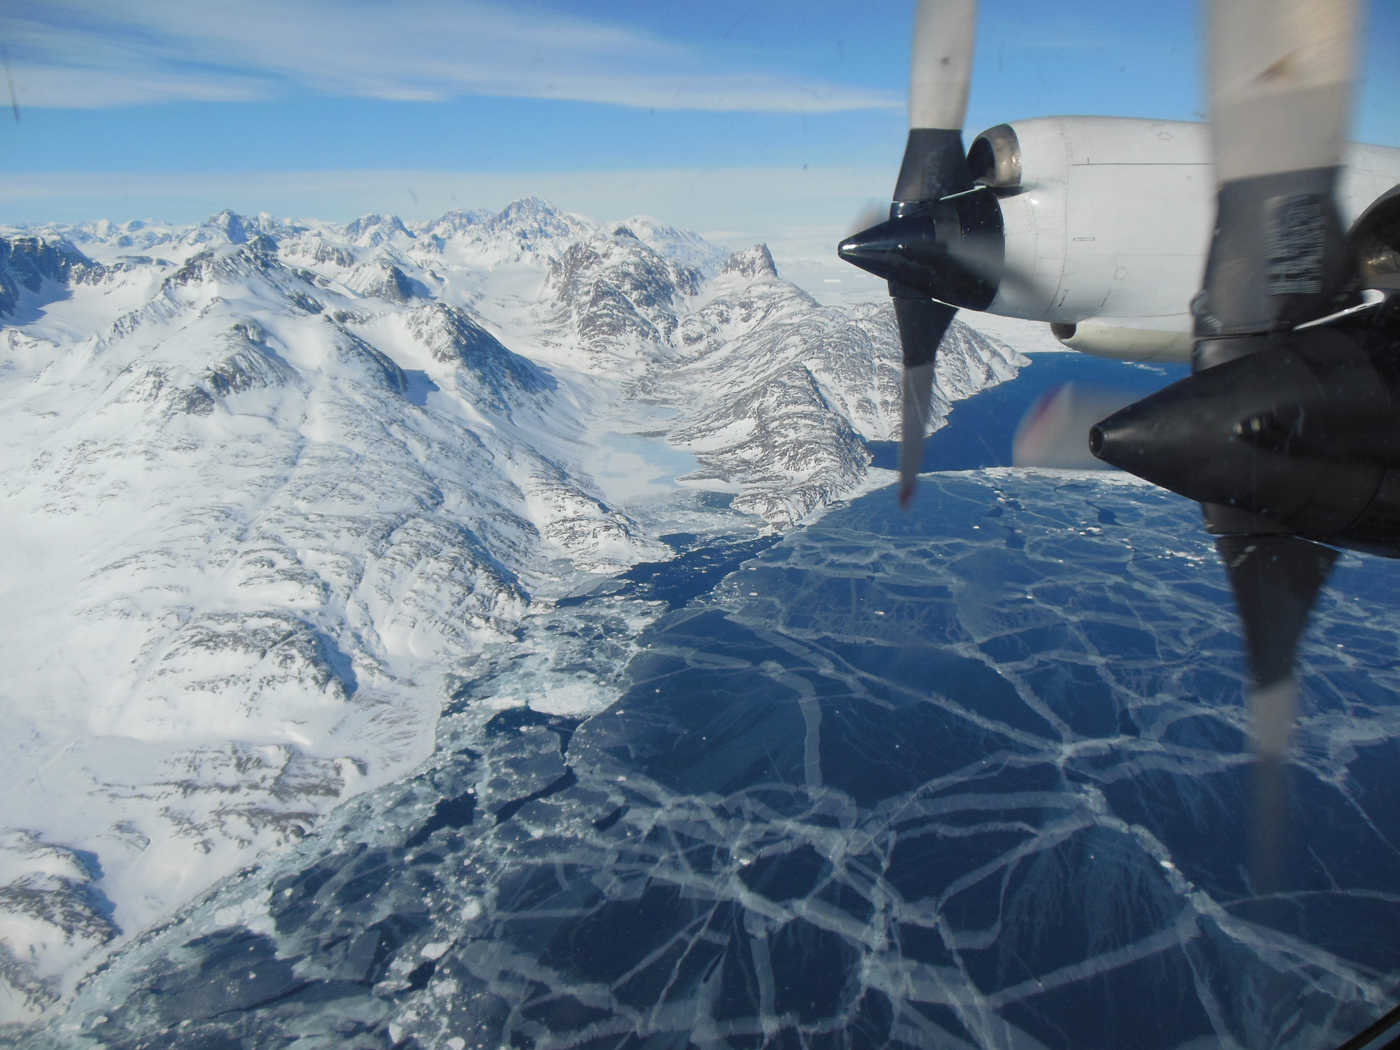 The plane flies over sea ice. The P-3B propeller can be seen out the window of the plane.